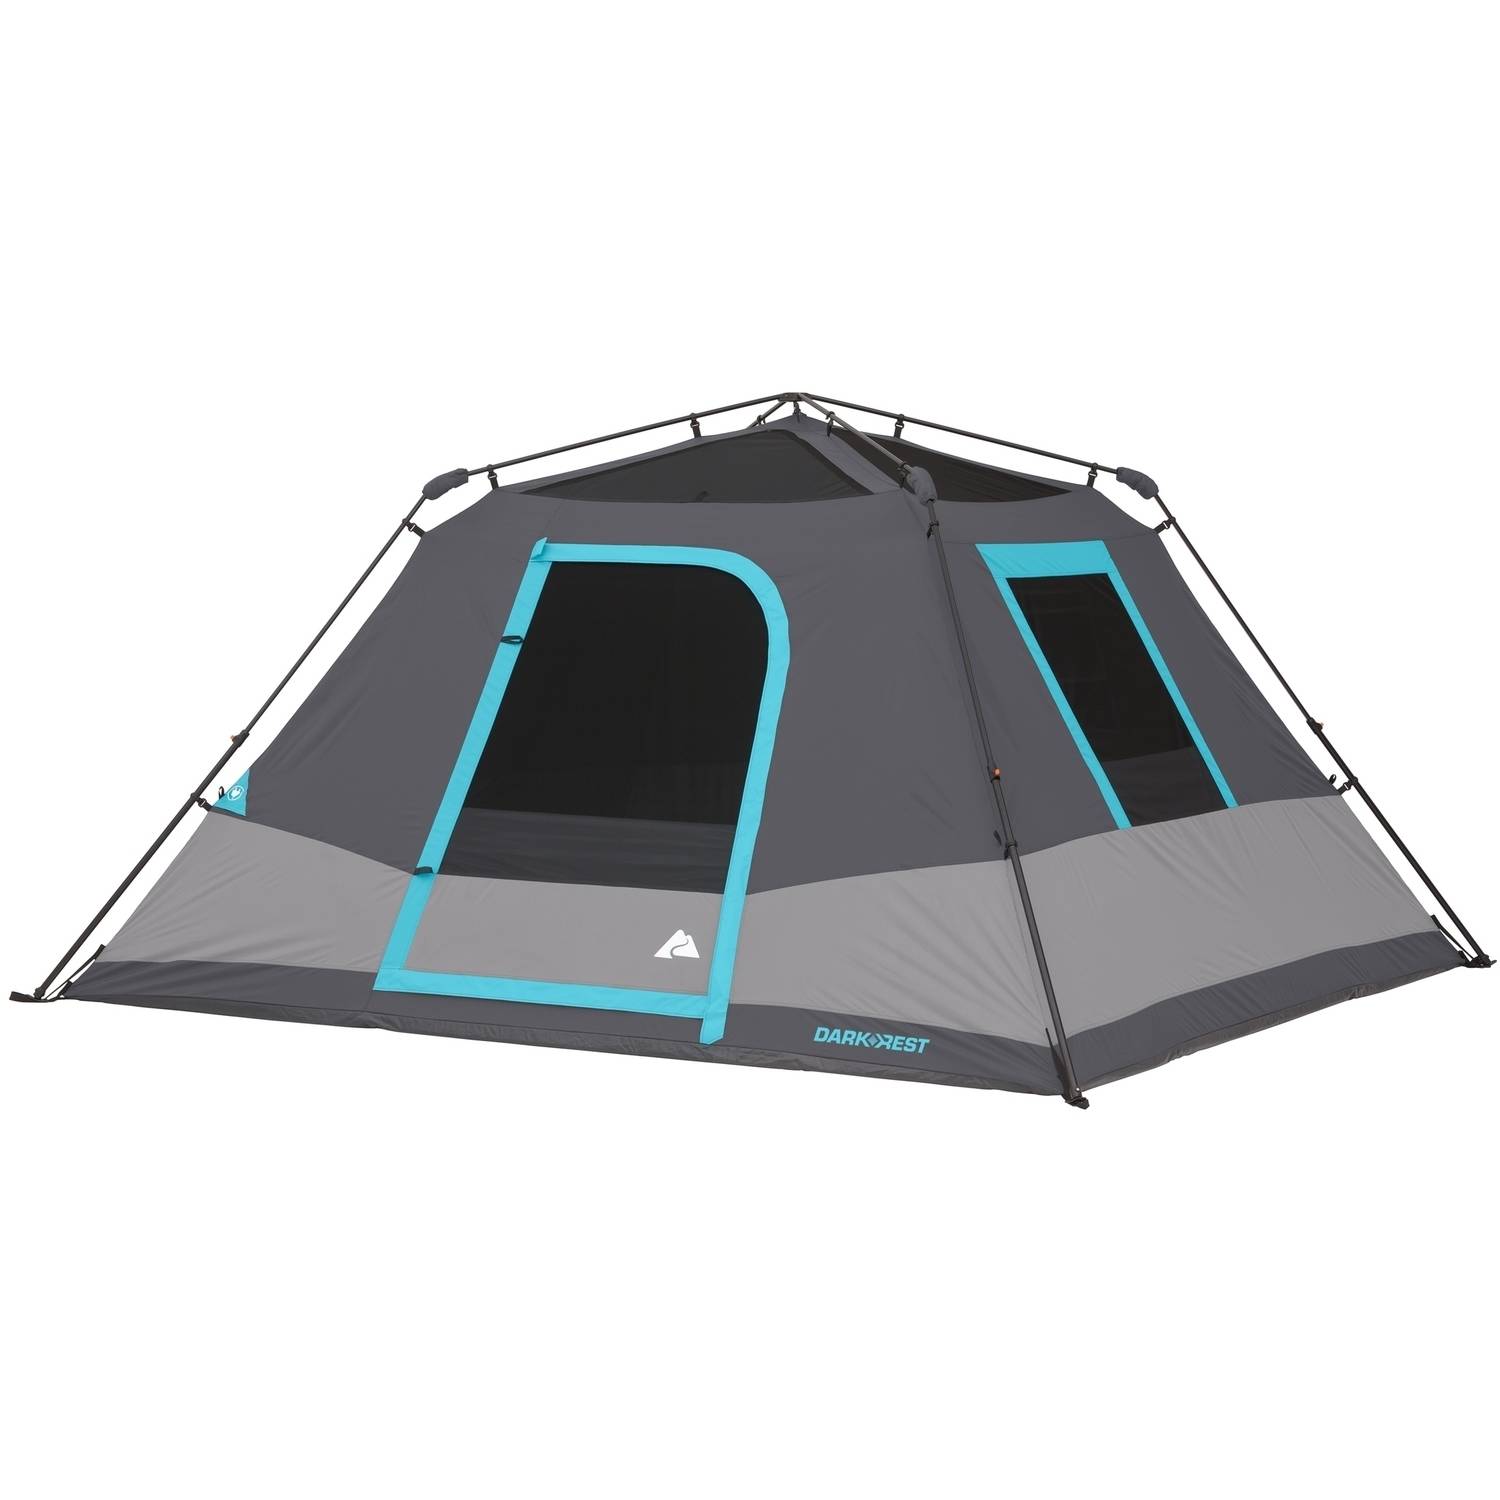 Ozark Trail 10 X 9 6-Person Dark Rest Instant Cabin Tent, 16.81lbs - image 3 of 12